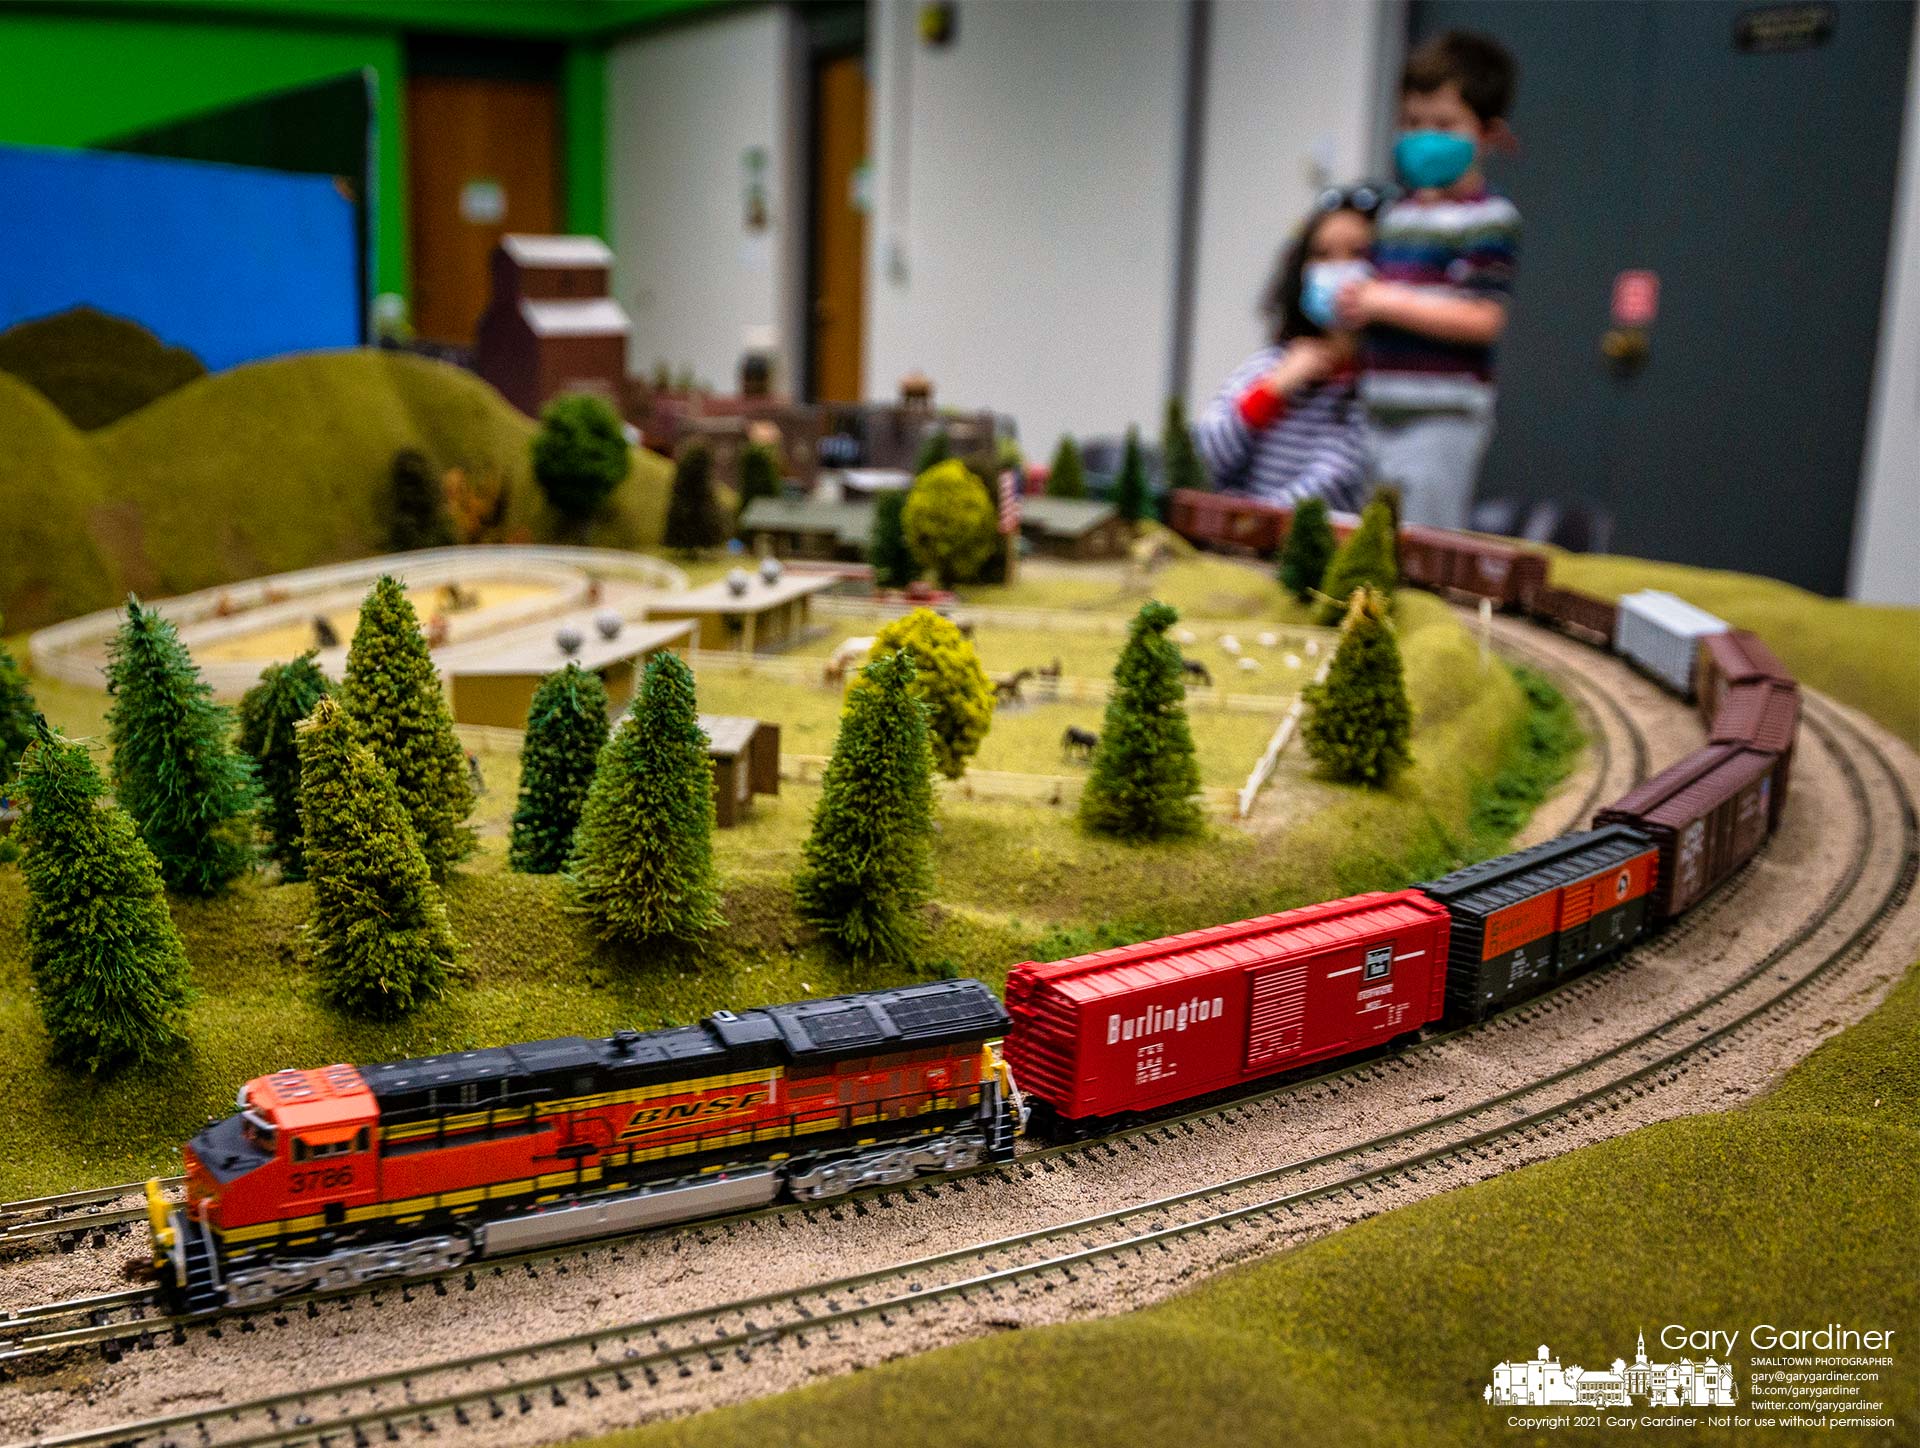 An N scale Burlington Northern and Santa Fe Railway locomotive pulls freight cars along a turn at the Columbus Area "N" Scalers installation filling the conference room at the Westerville Library. My Final Photo for Dec. 10, 2021.